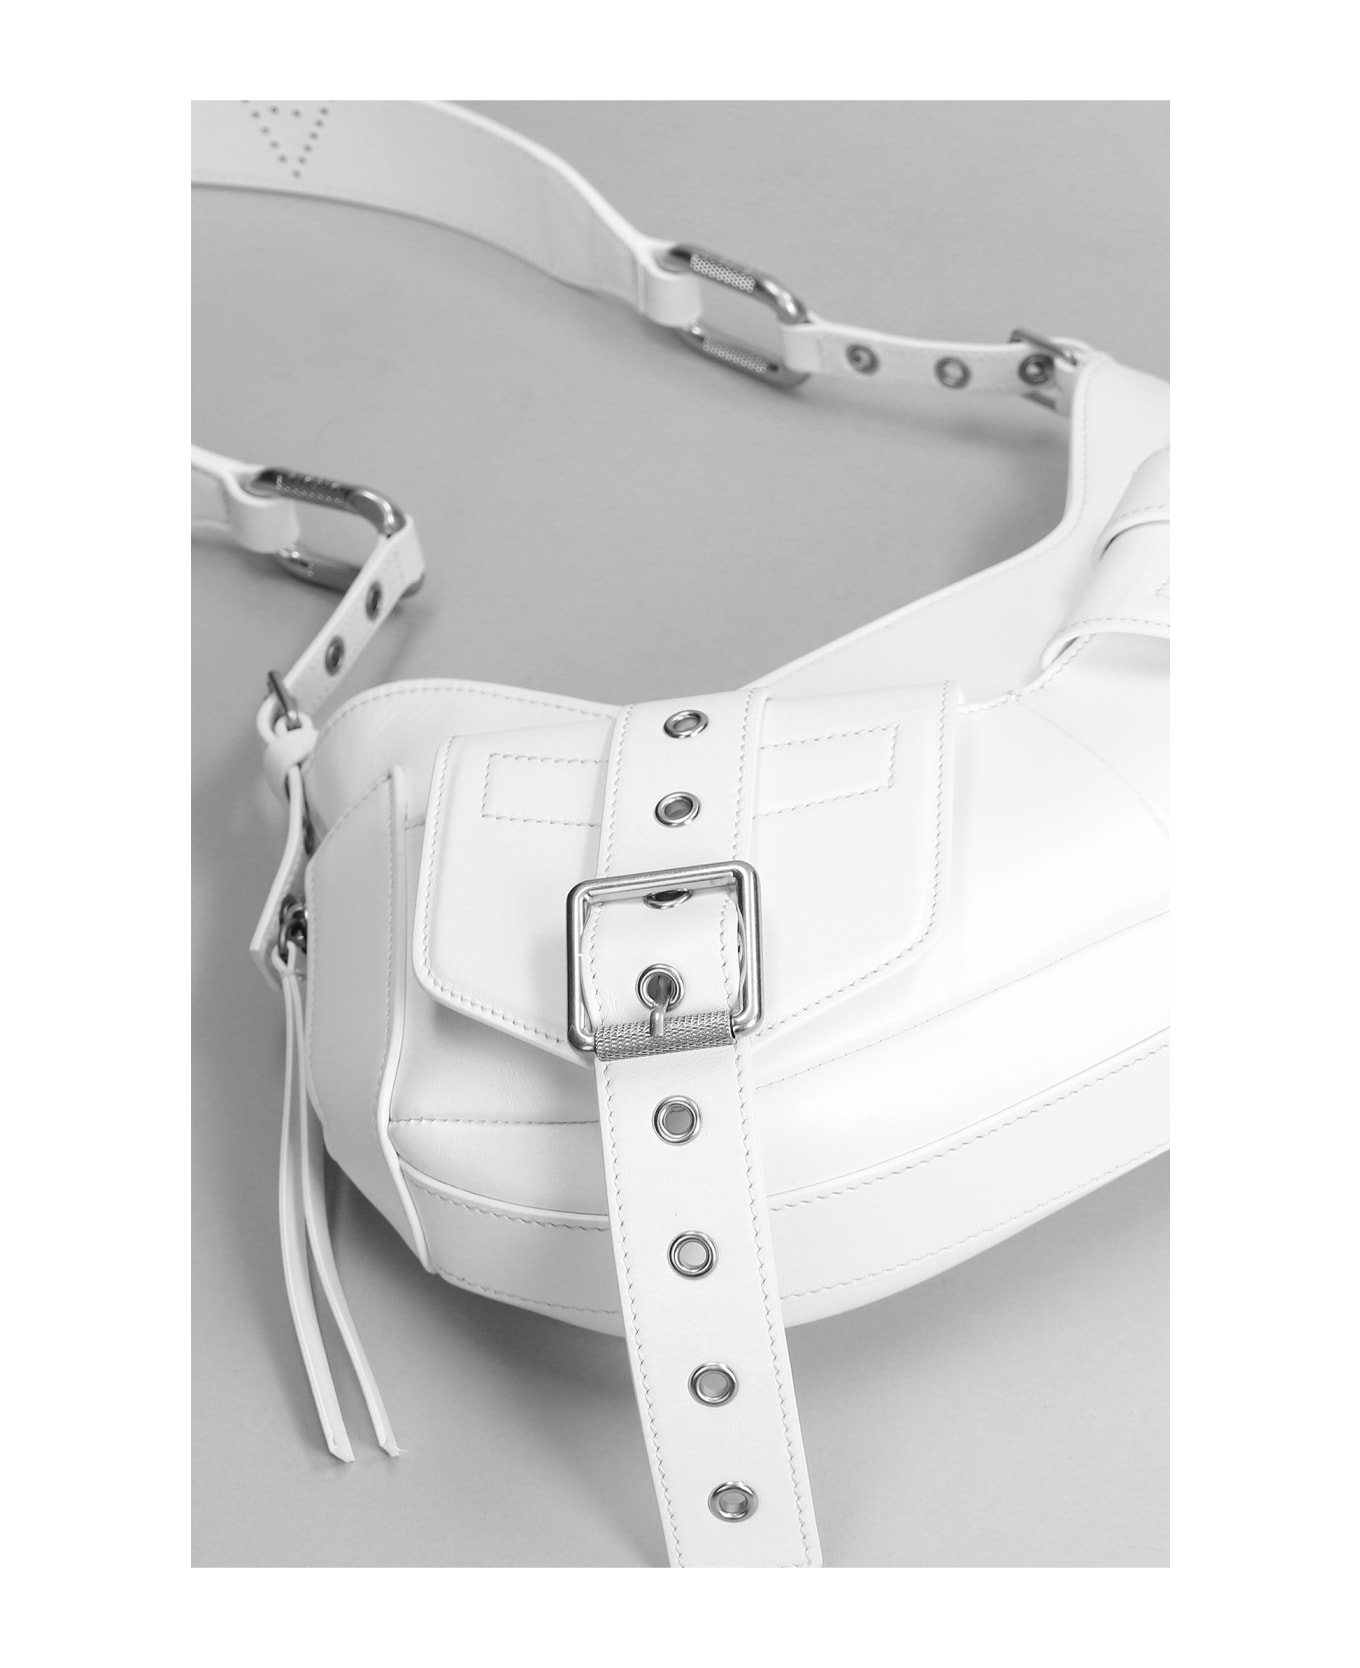 Biasia Shoulder Bag In White Leather - white